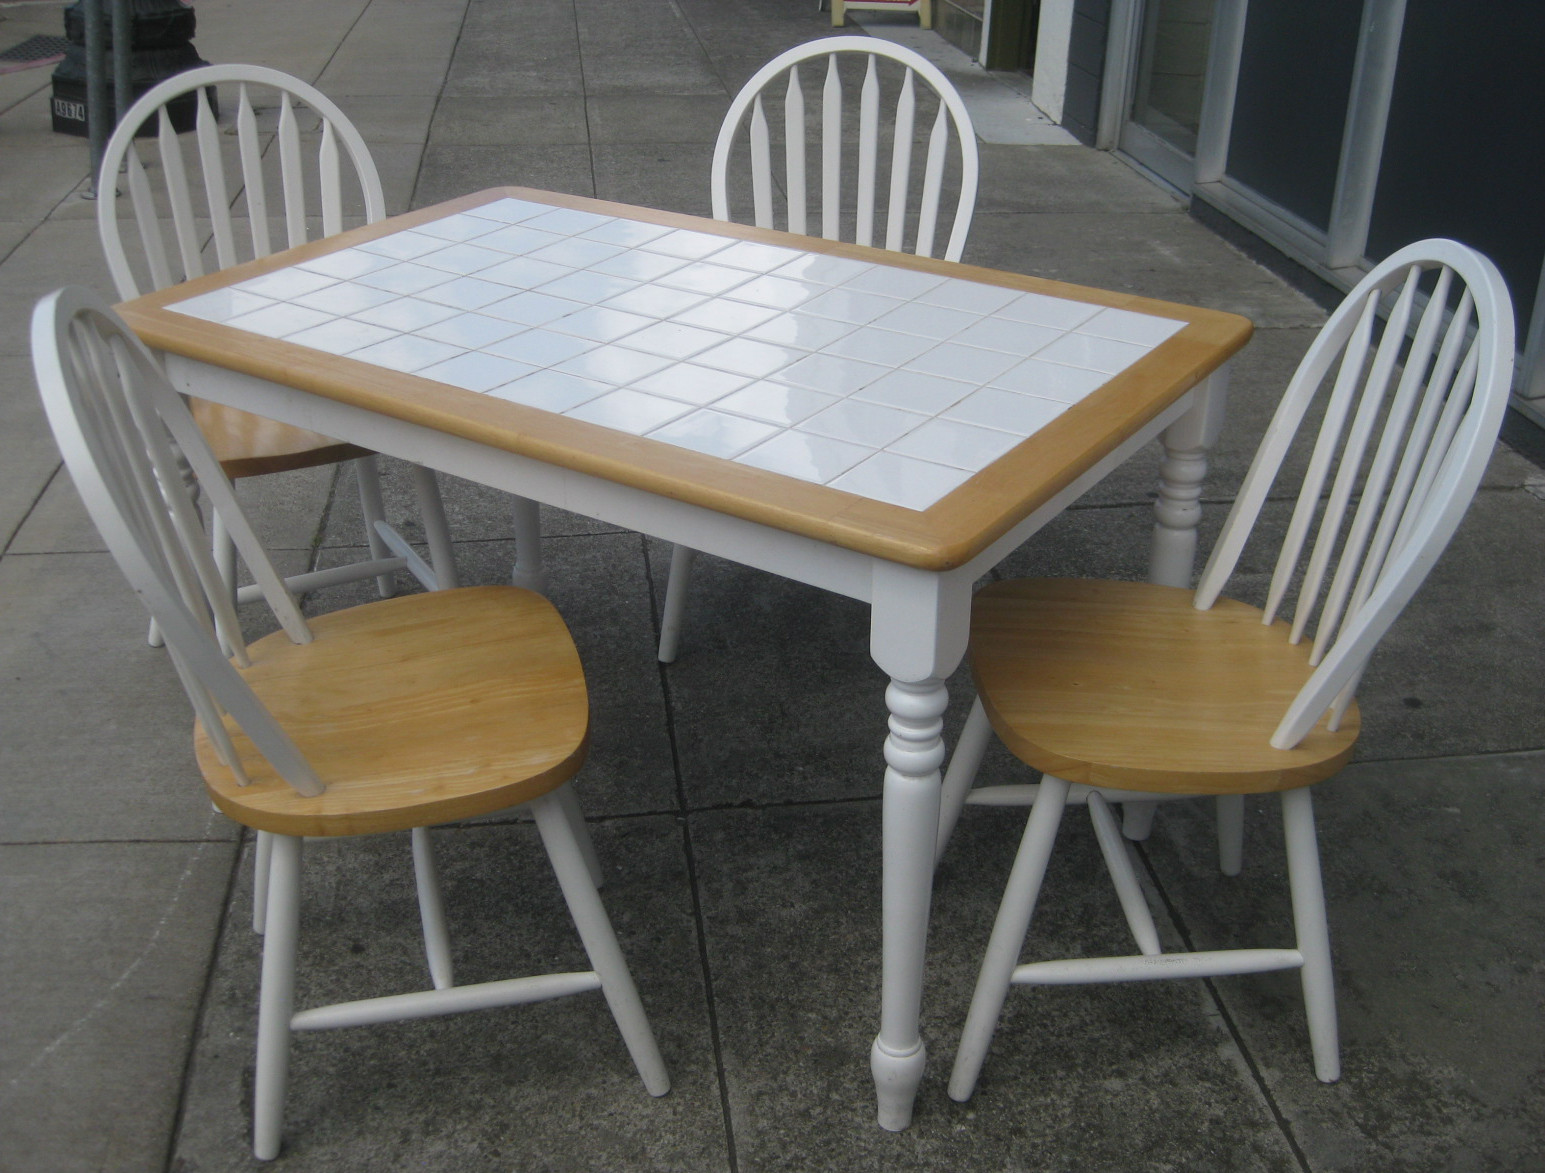 Ceramic Tile Kitchen Tables
 UHURU FURNITURE & COLLECTIBLES SOLD Tile top Table and